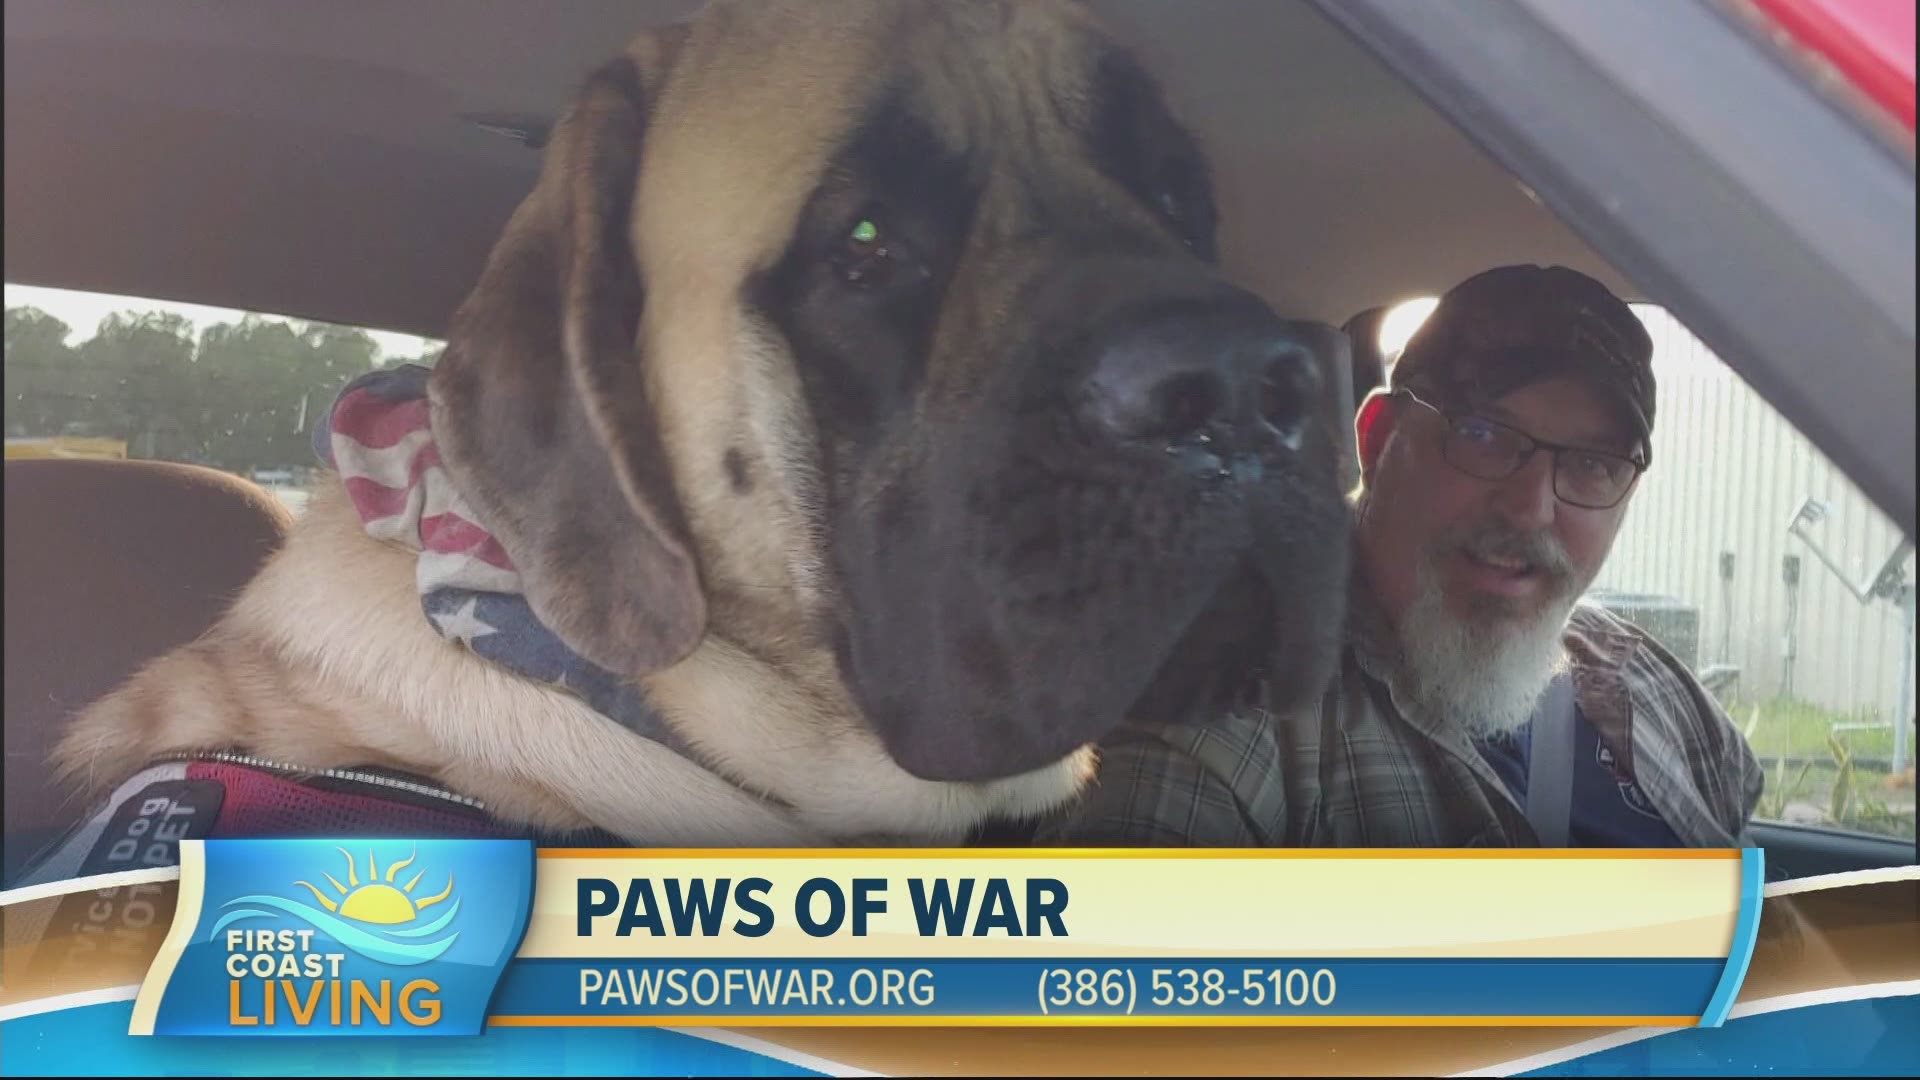 Paws Of War's mission is to train and place shelter dogs to serve and provide independence to U.S. military Veterans that suffer from the emotional effects of war